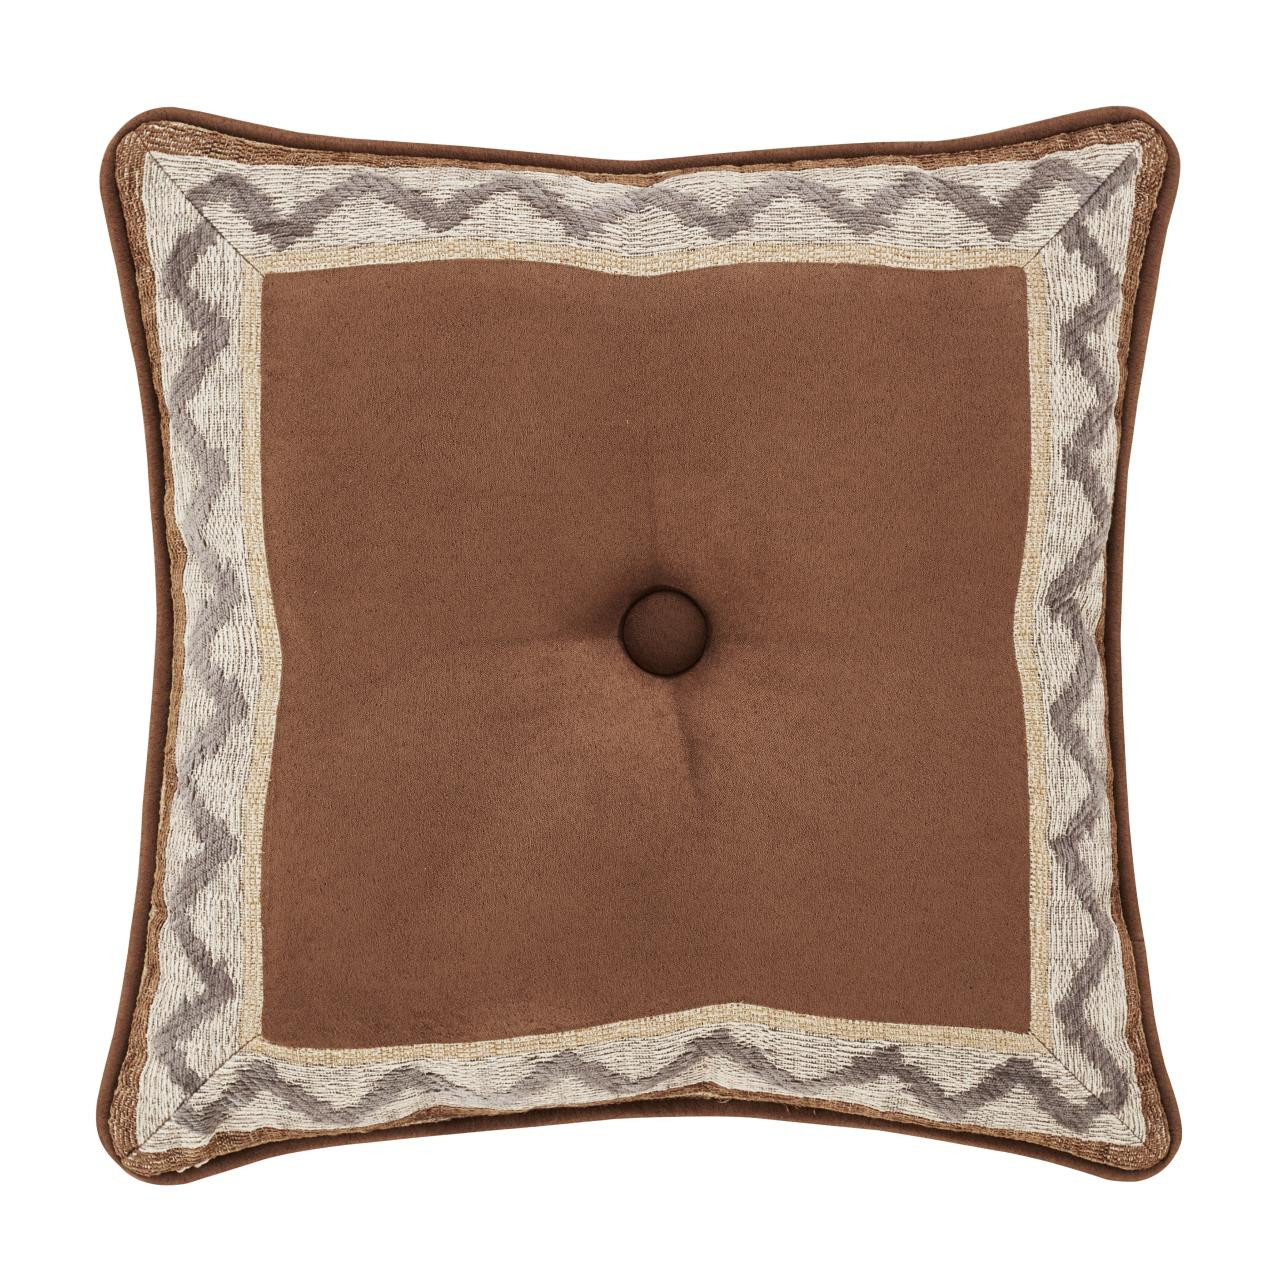 Timber Gold Square Pillow - 252603018SQ9